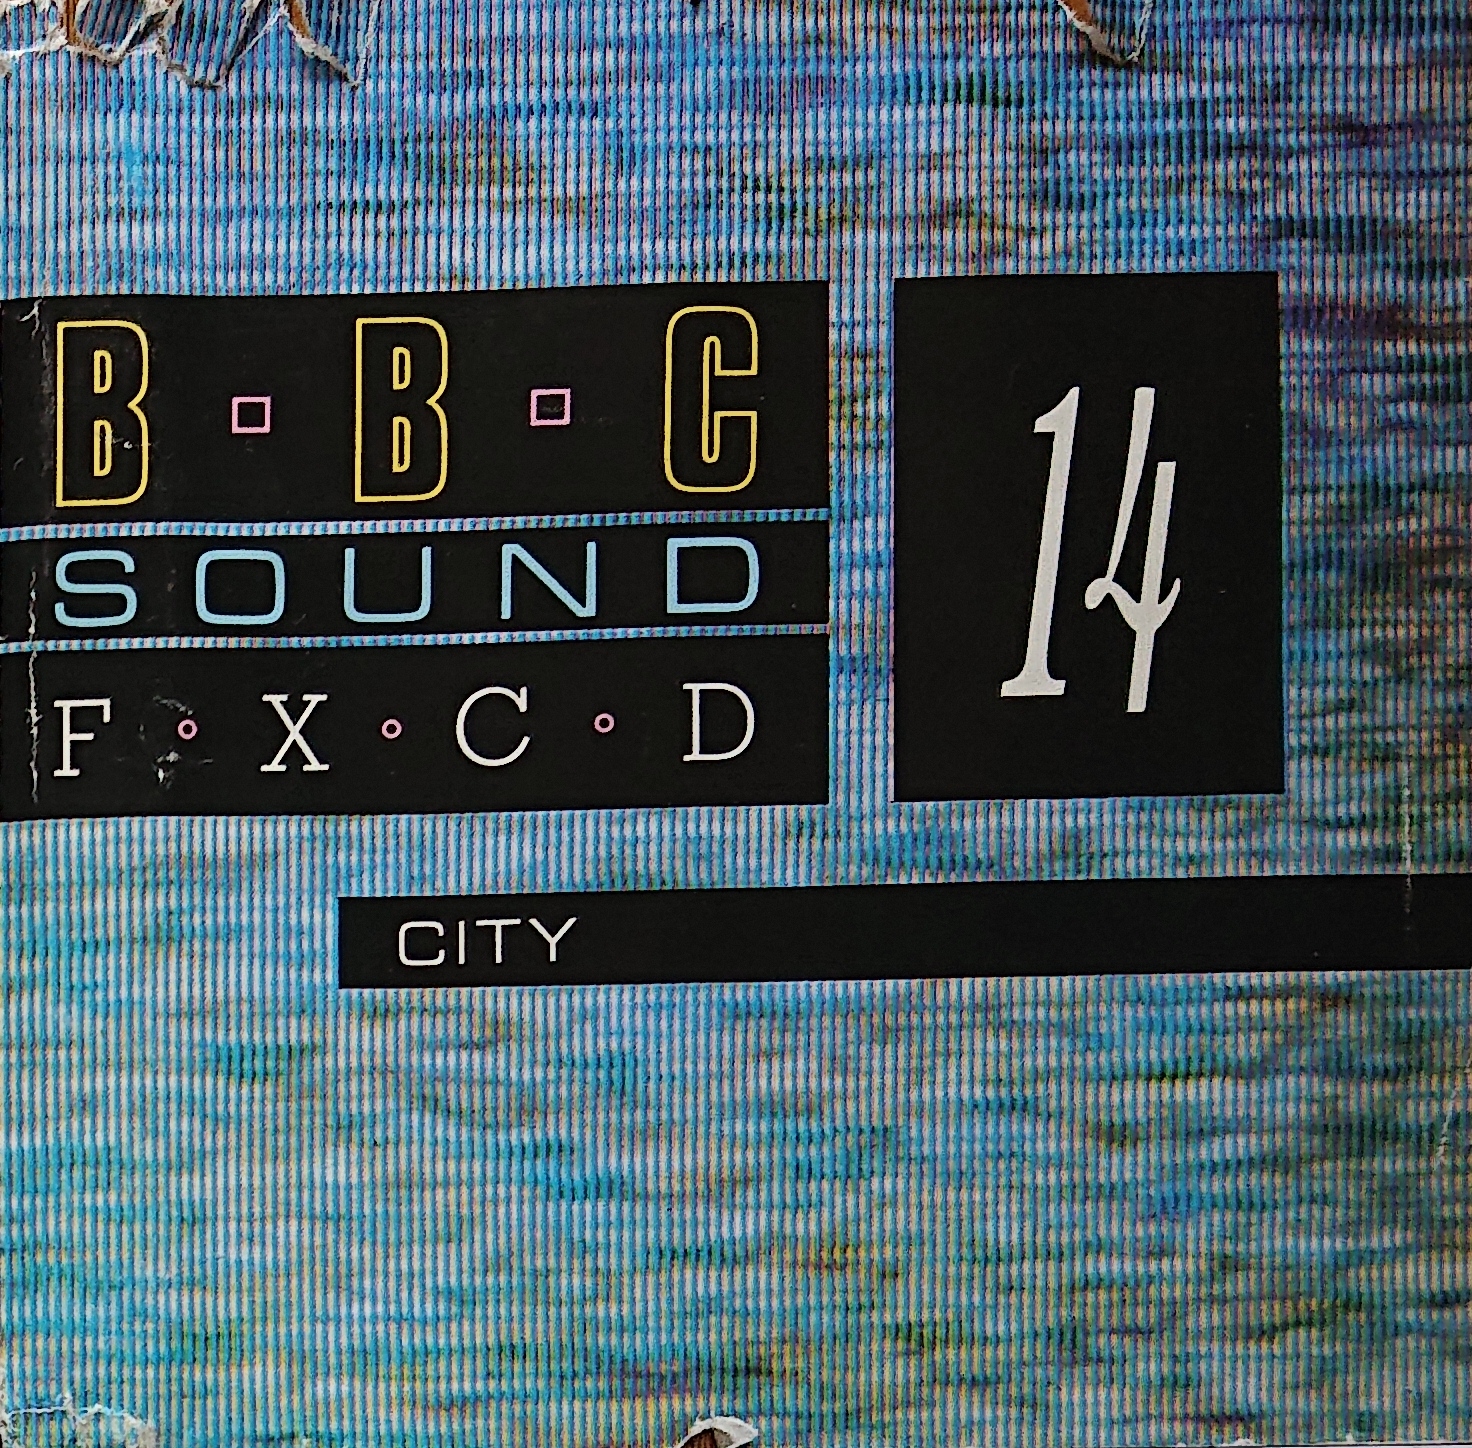 Picture of BBCCD SFX014 Cities by artist Various from the BBC cds - Records and Tapes library